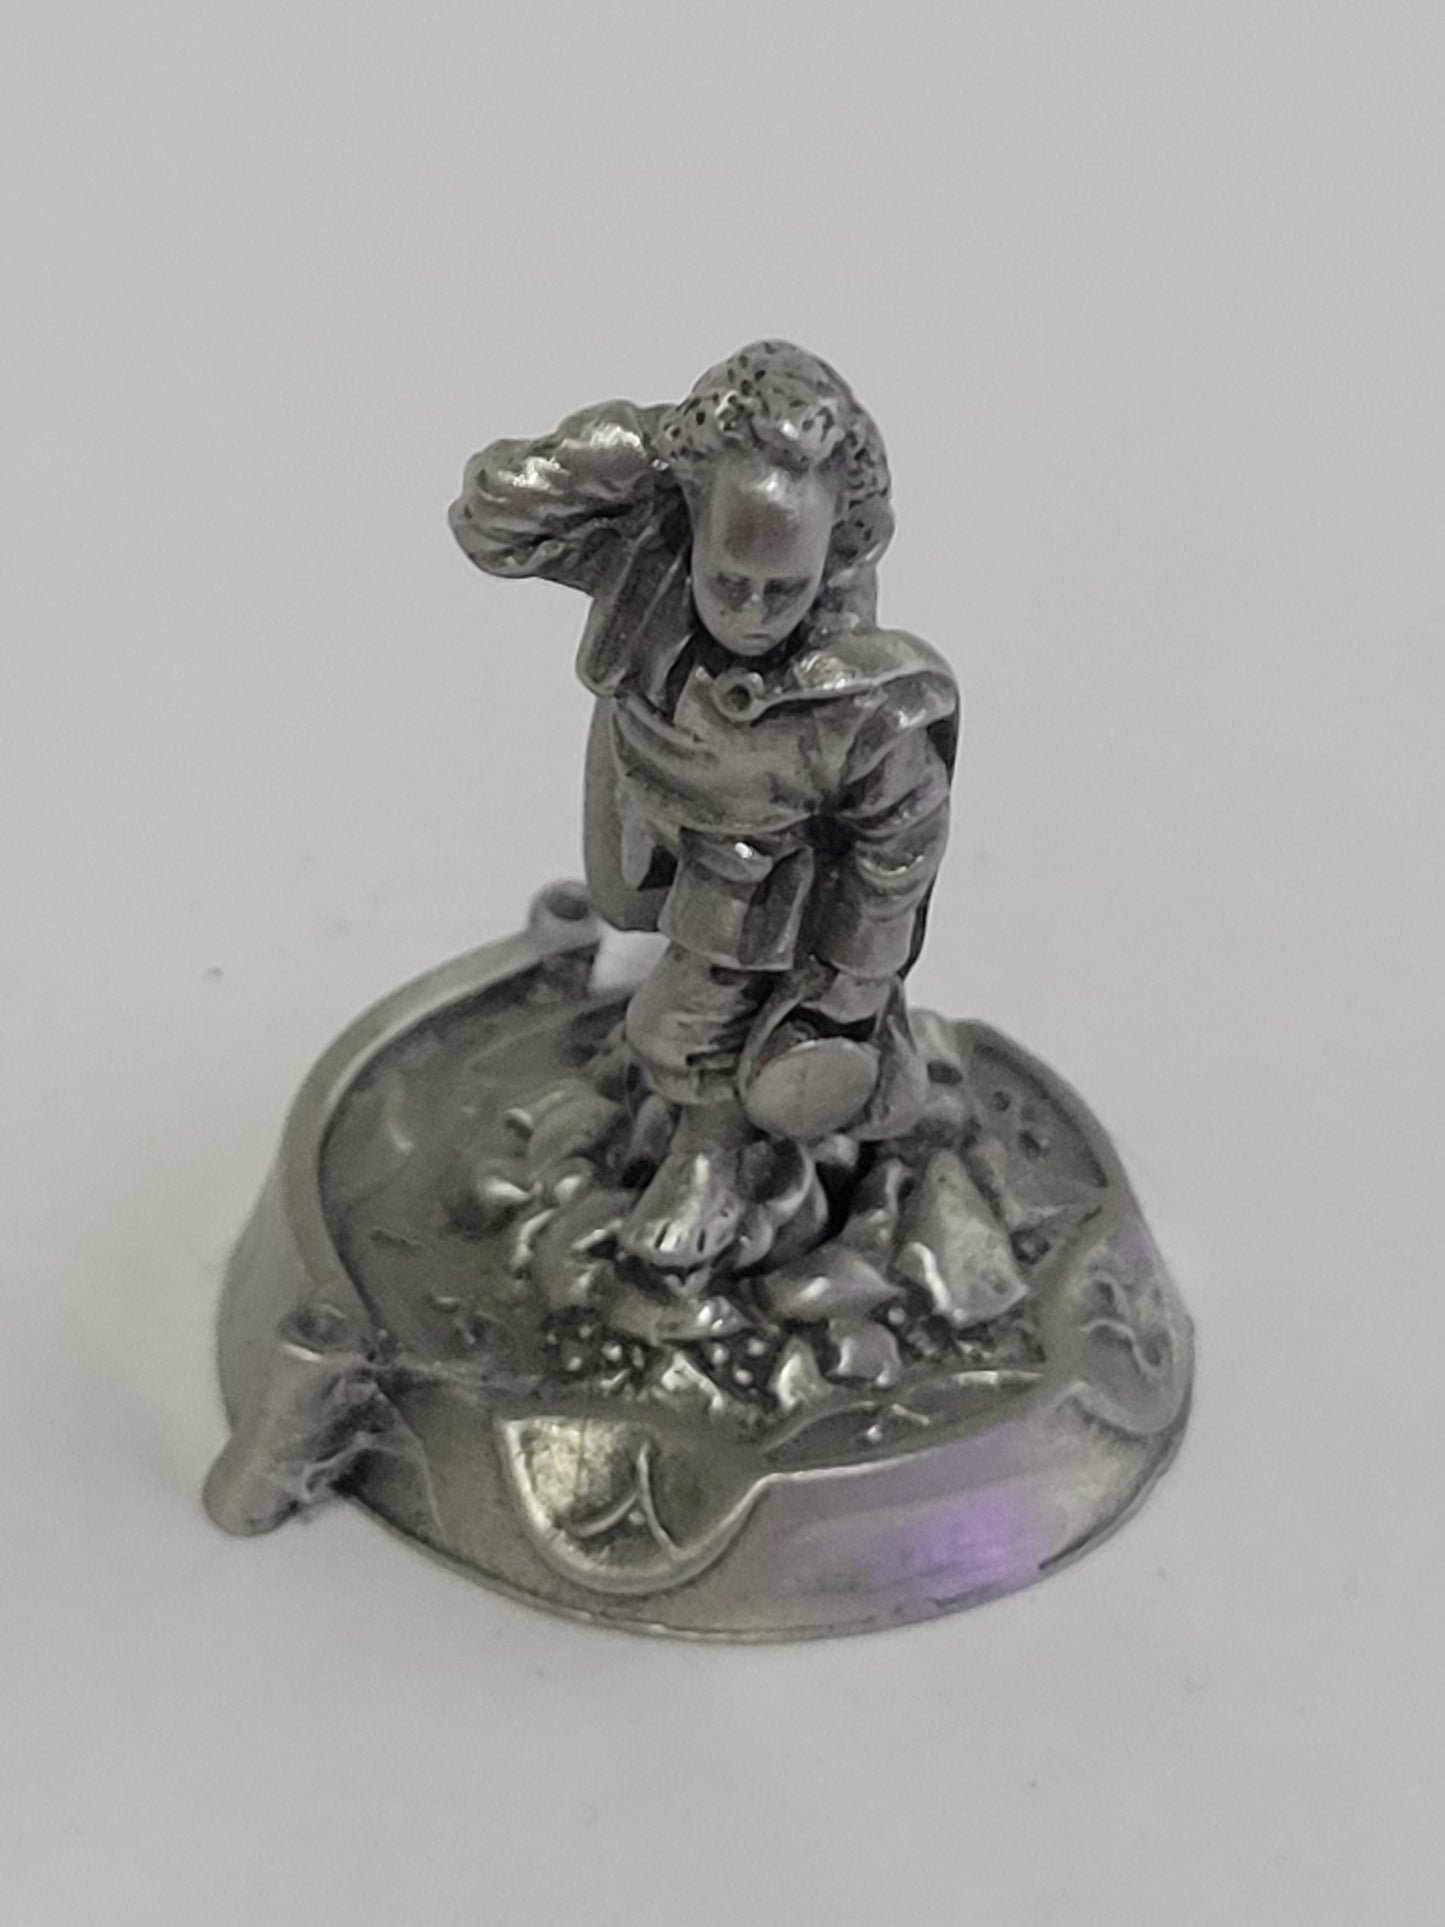 Sam from the Lord of the Rings by Rawcliffe, Pewter Figurine